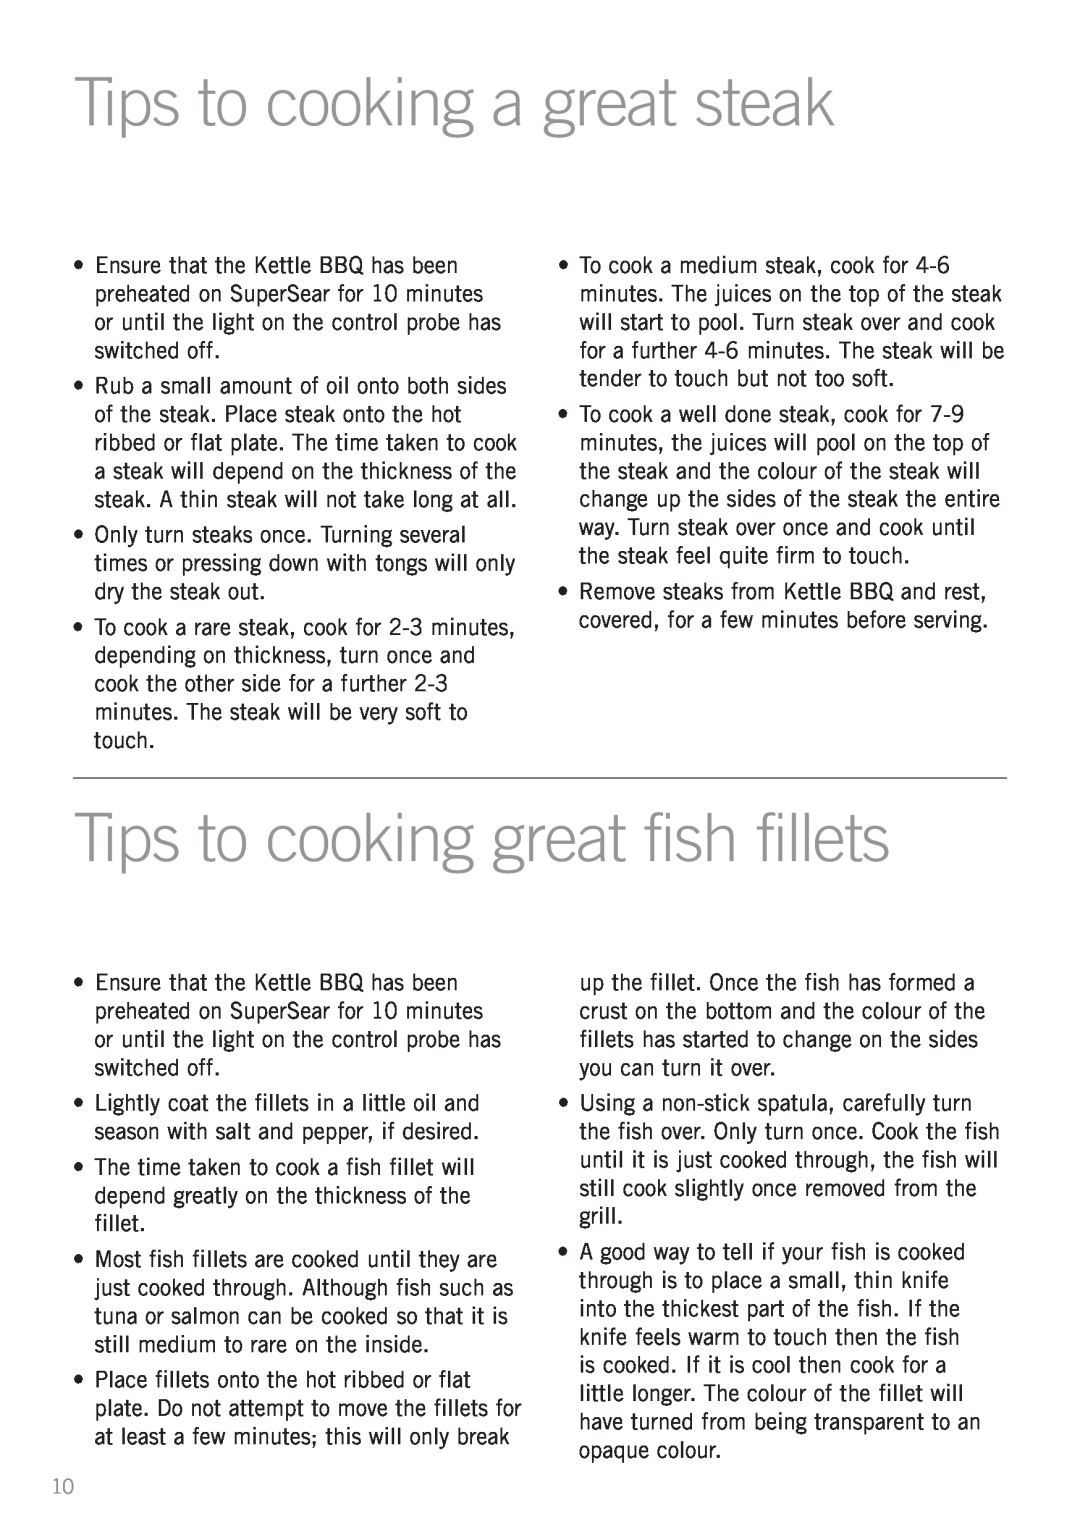 Sunbeam HG5400 manual Tips to cooking a great steak, Tips to cooking great fish fillets 